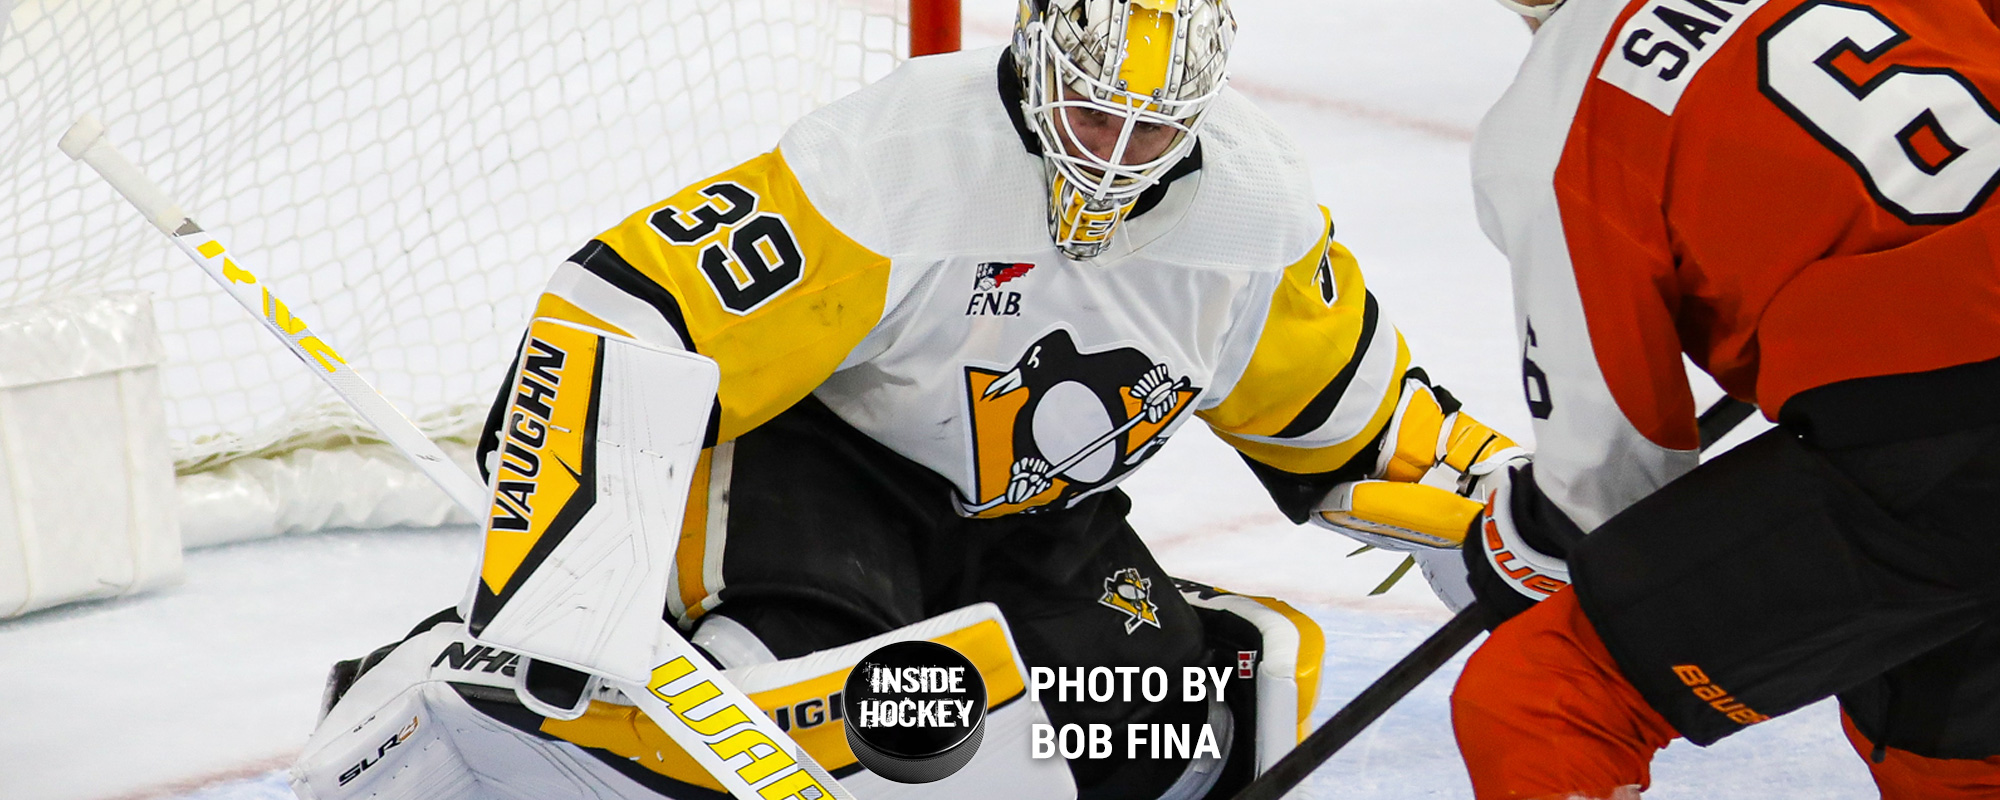 Down to the Wire for the Penguins